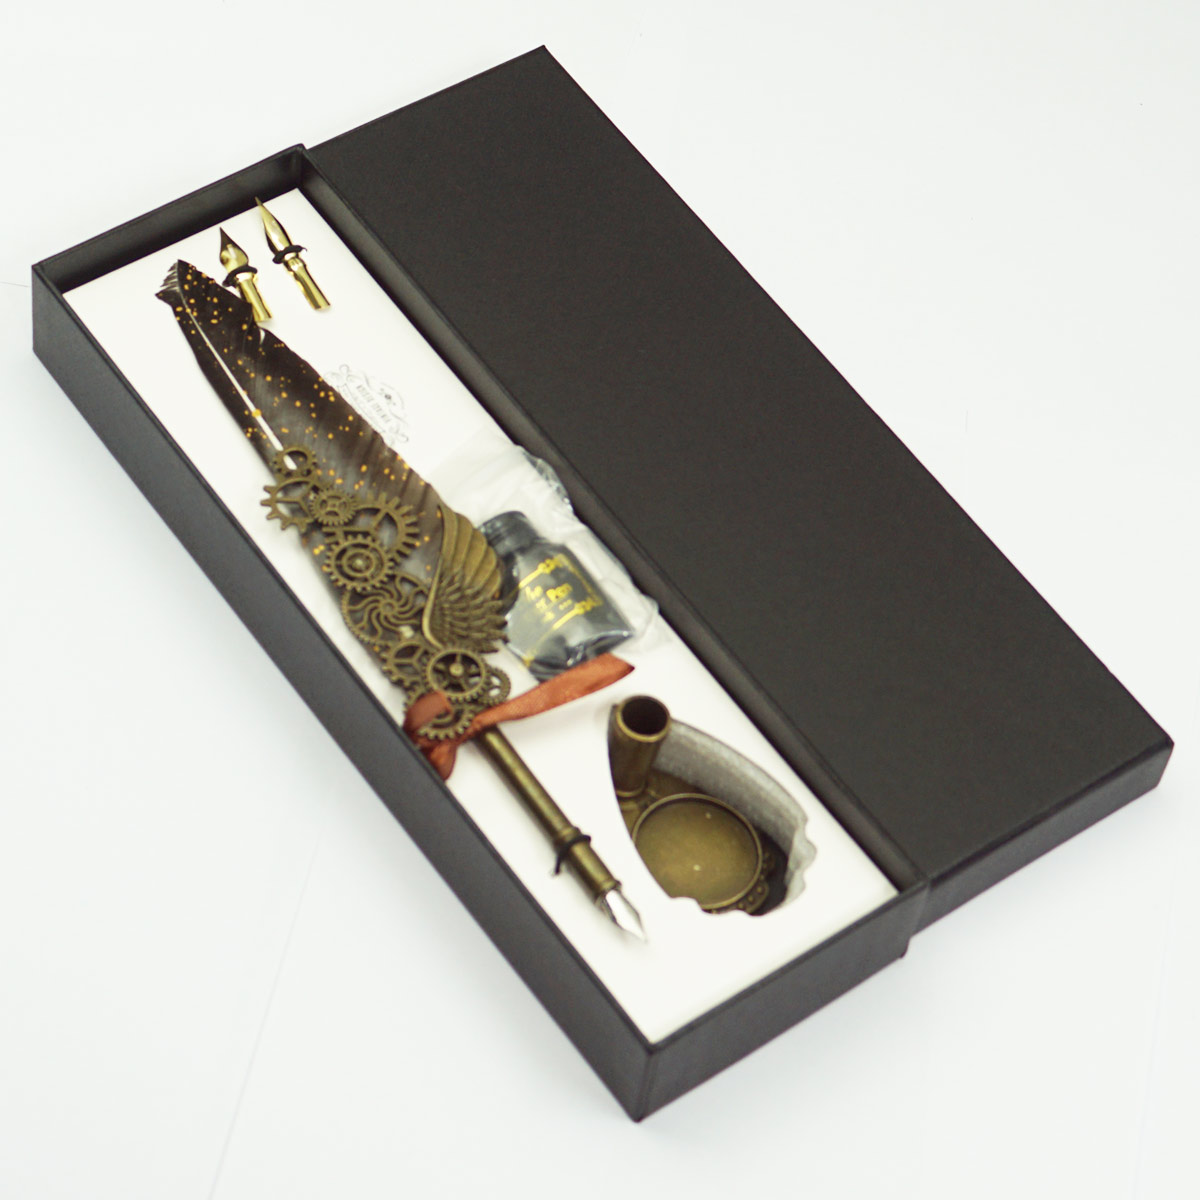 penhouse.in Feather Pen Set Brown Color Feather With Stand And Inkbottle With 3 Nibs SKU 23021